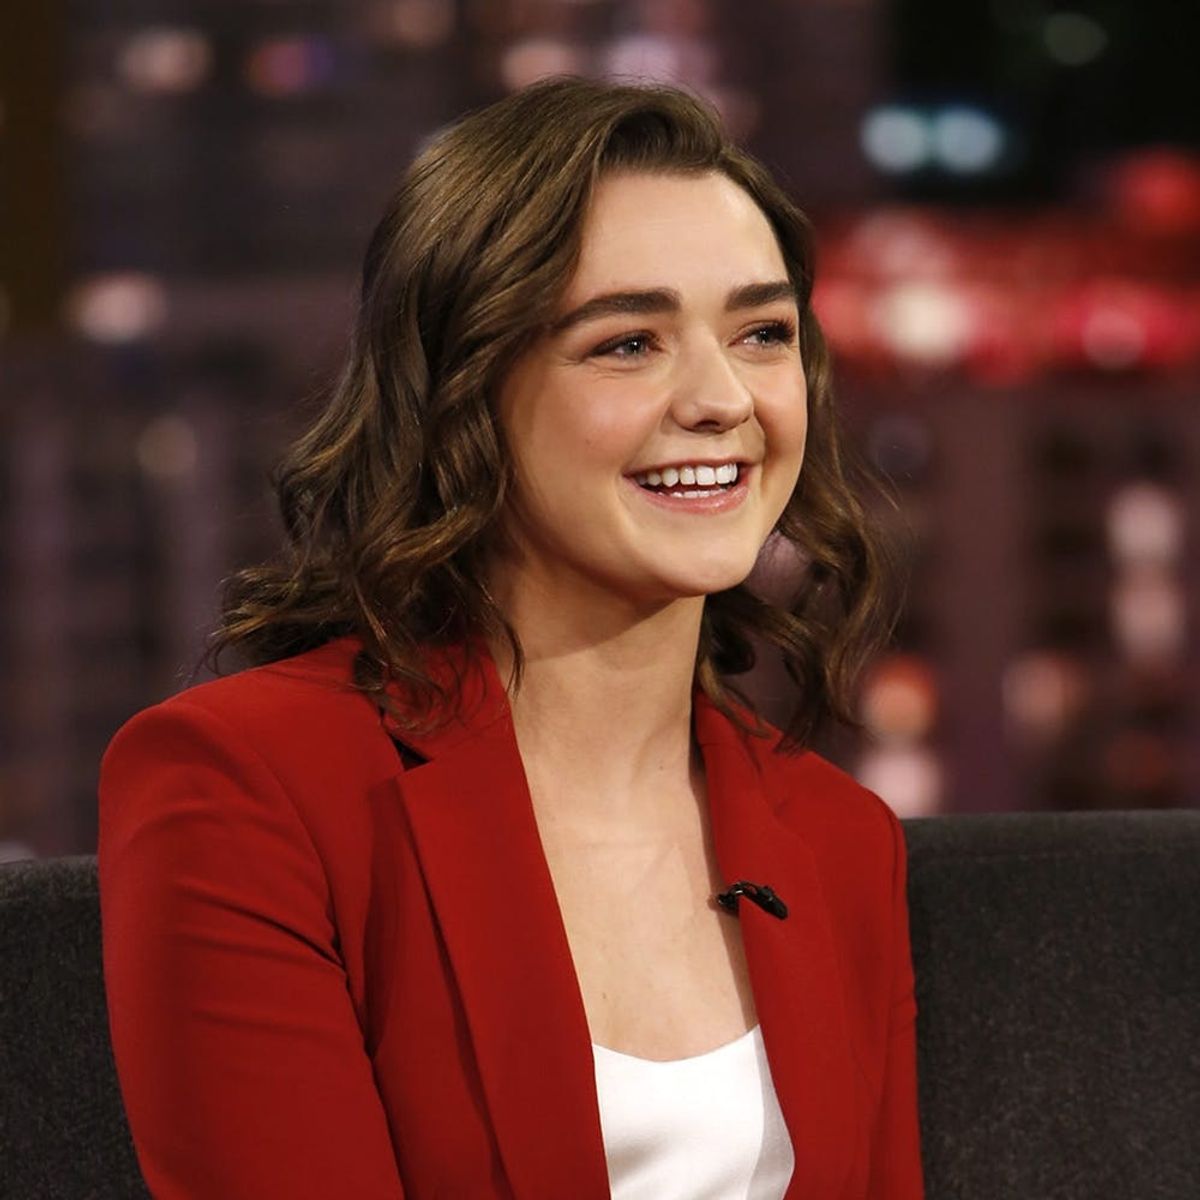 Maisie Williams Reacts to Rumors About the Ending of ‘Game of Thrones’